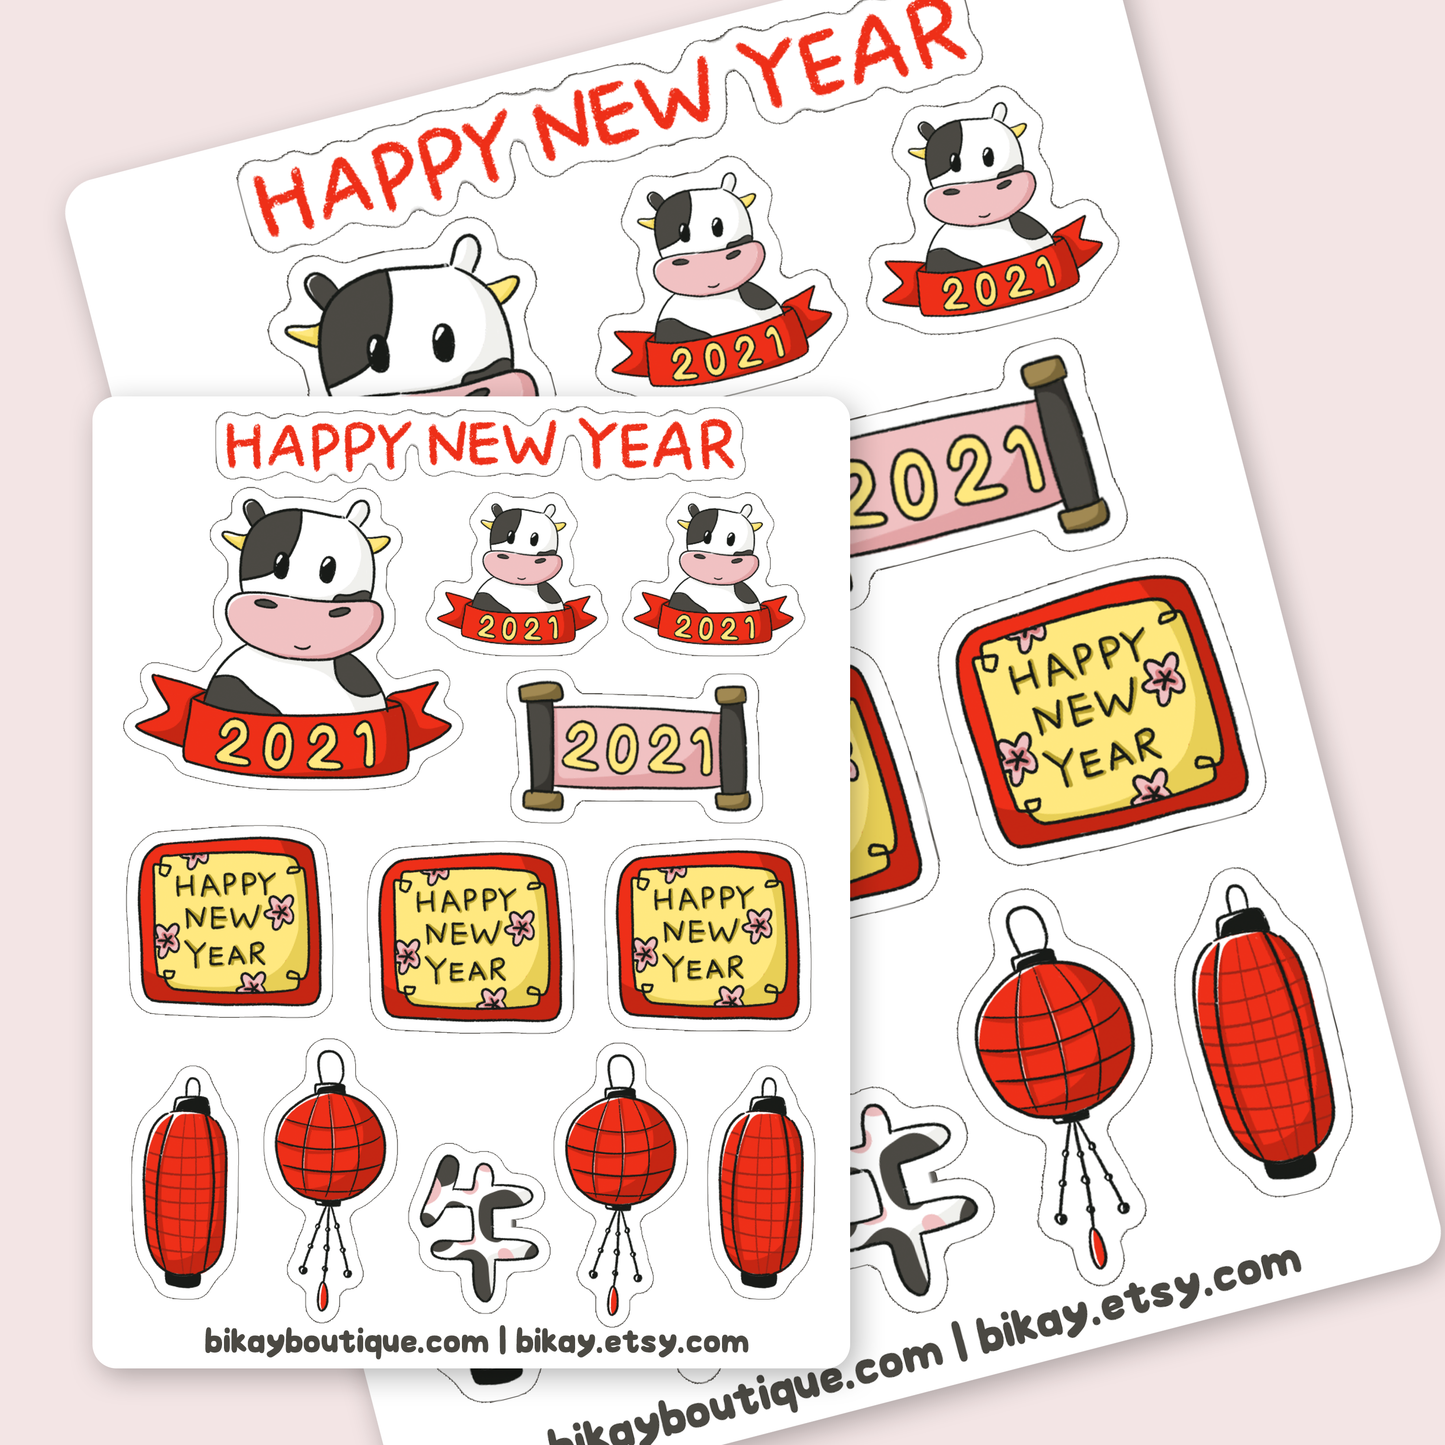 2021 Lunar new year Card, year of the ox (Single or Card Pack)